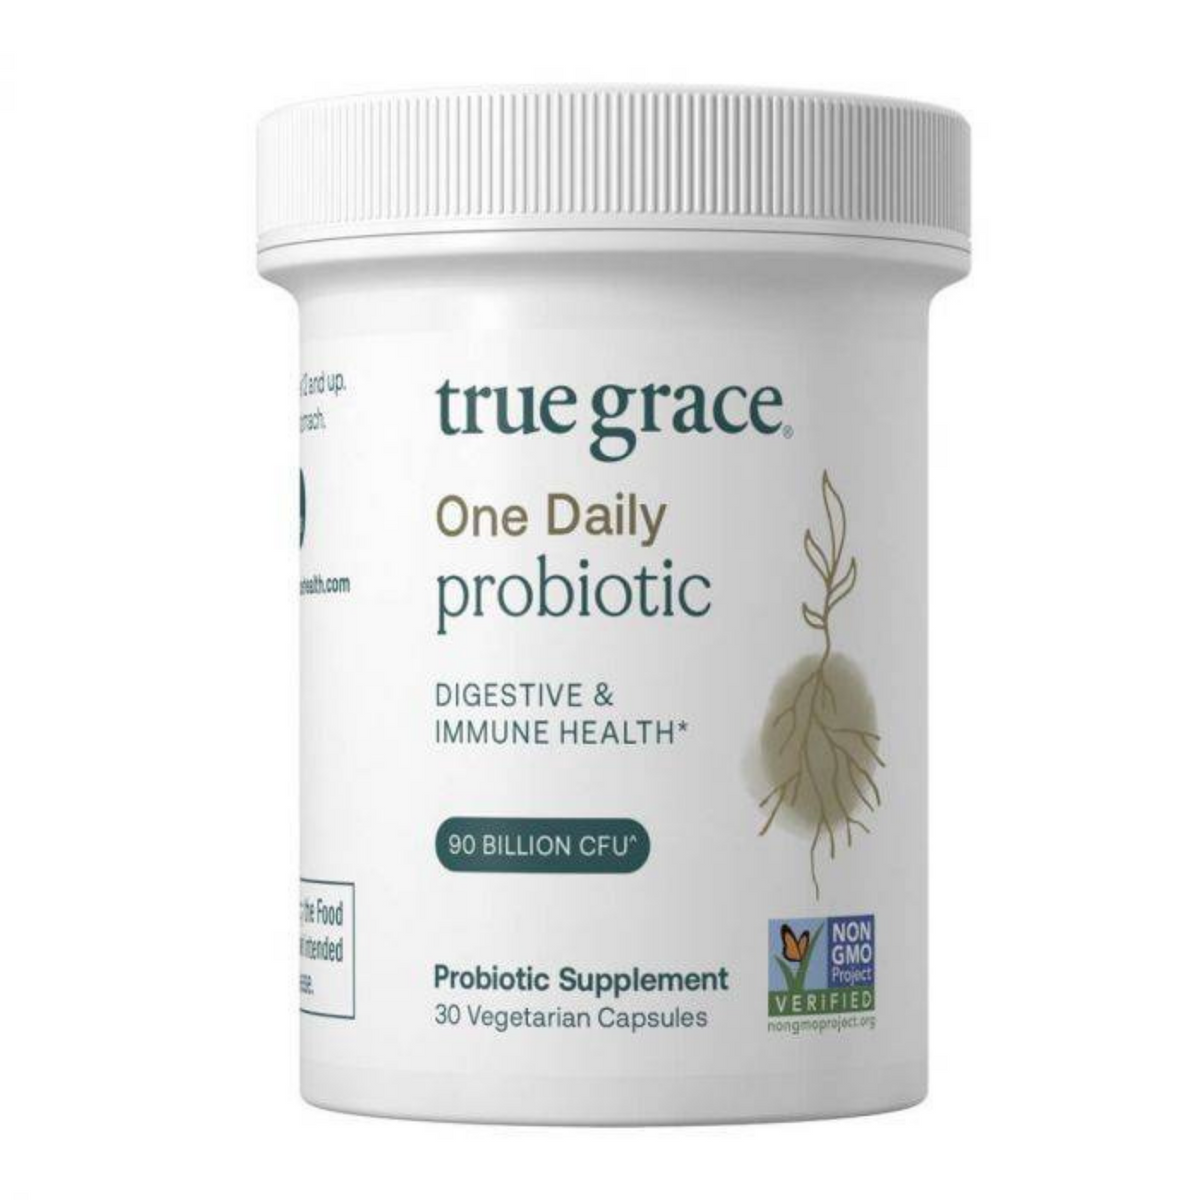 Primary Image of One Daily Probiotic